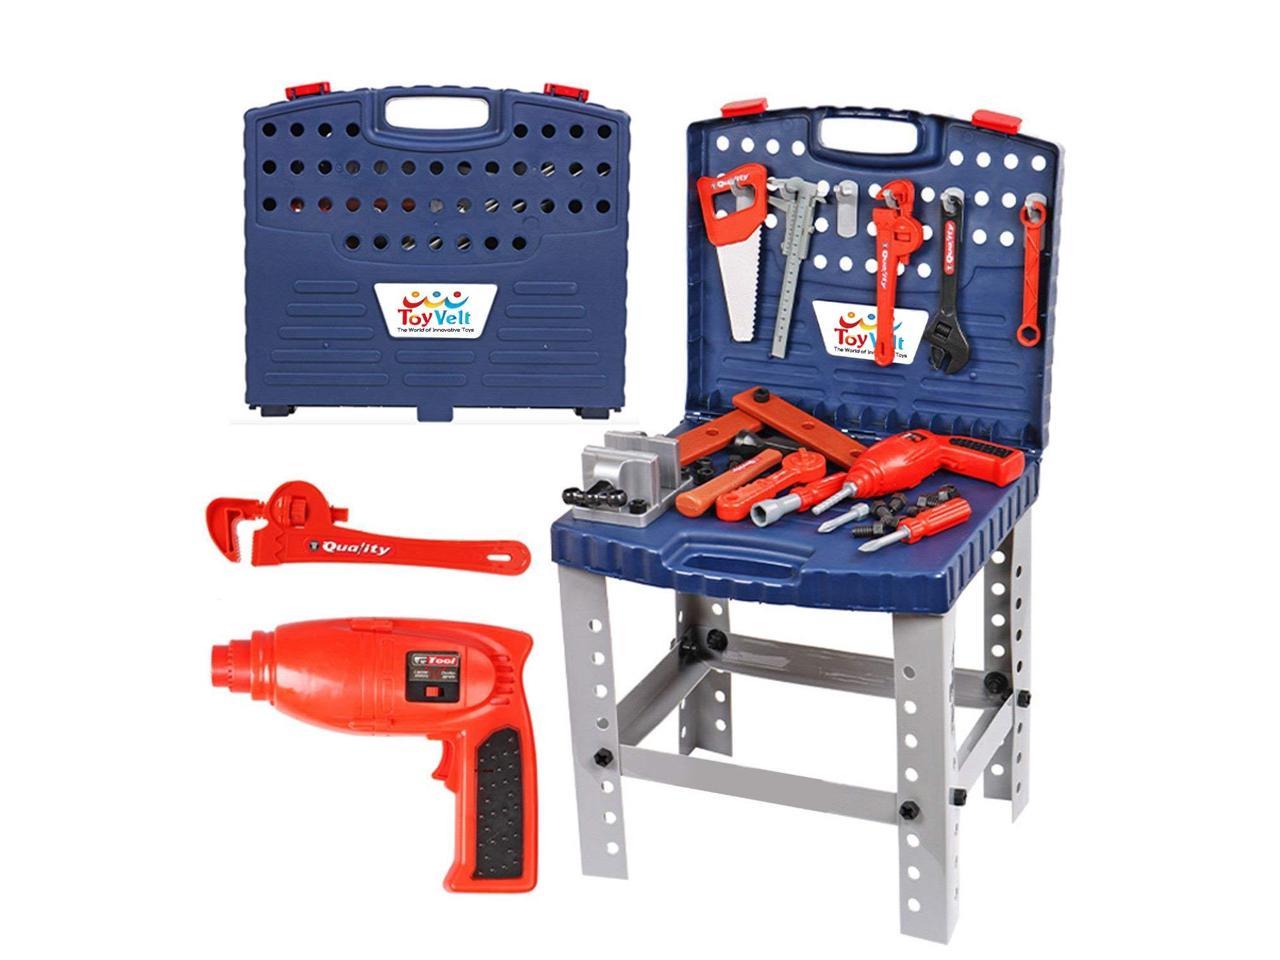 Power Tool Workshop Durable Kids Tool Kits Set Electronic Workbench Bench Drill Boys Toys Tool Pretend Play Construction Accessories STEM Educational Play Birthday Gifts for Boys and Girls Age 3-10 